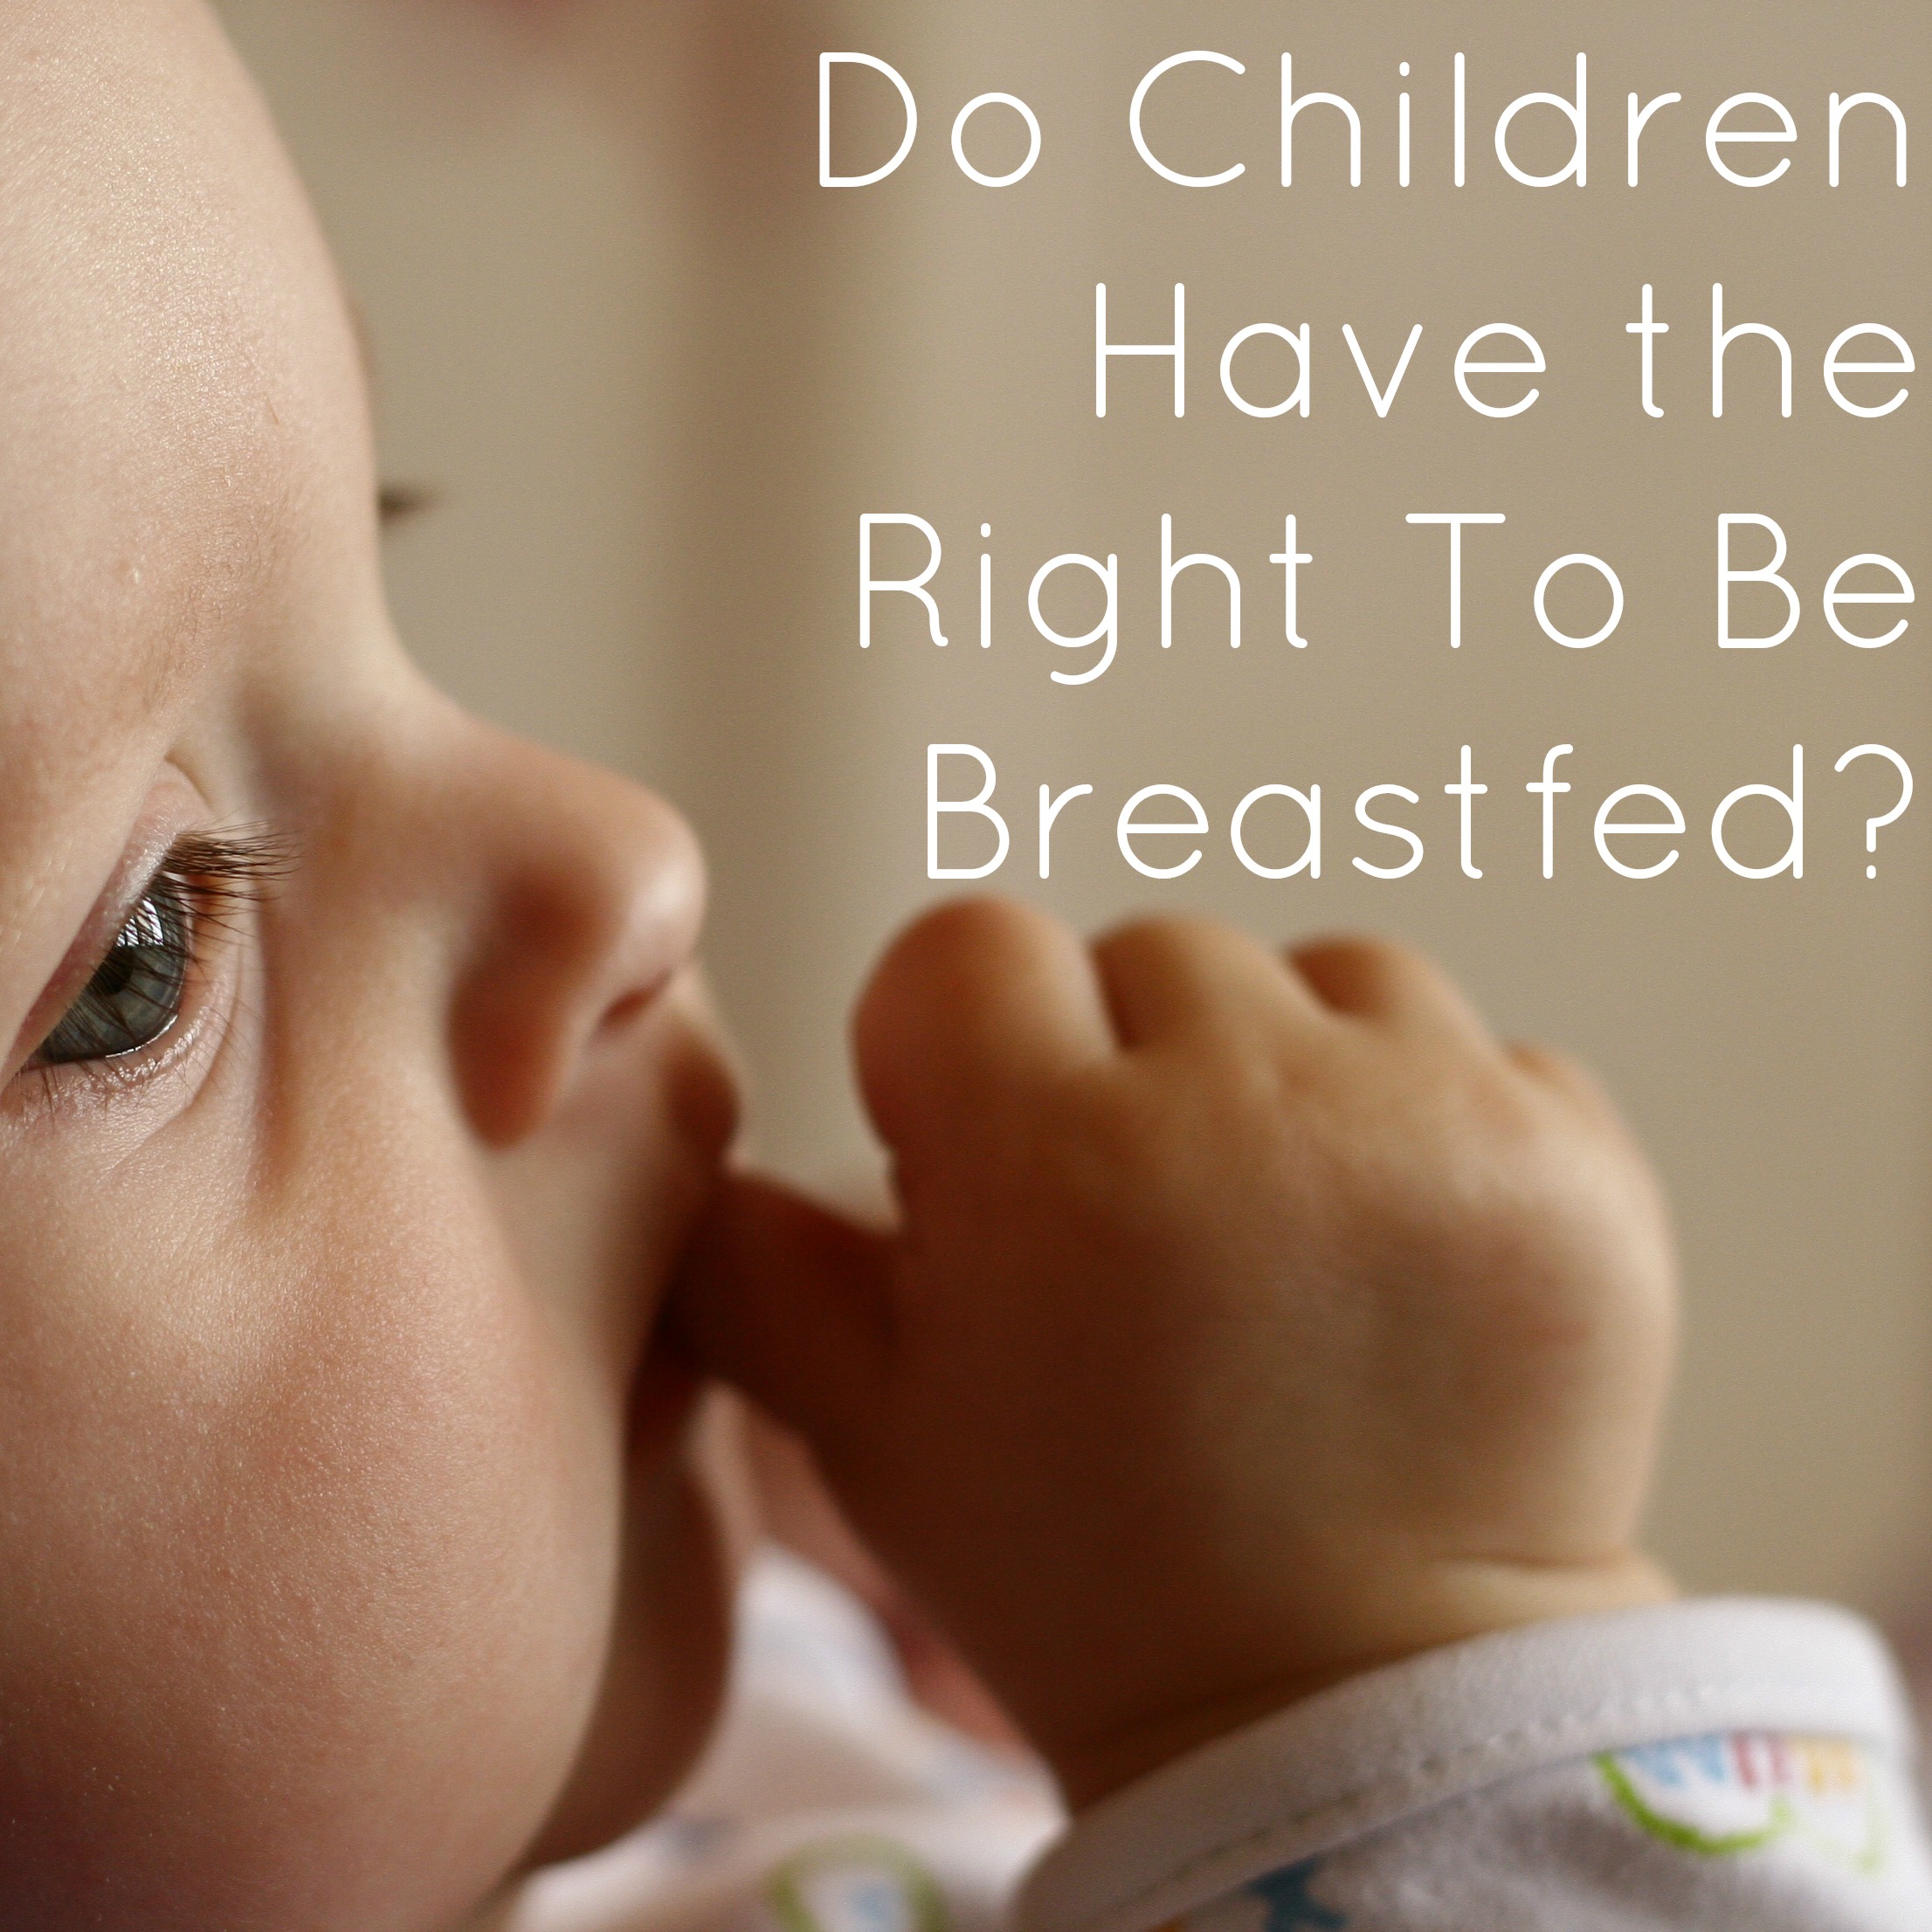 Do Children Have the Right To Be Breastfed?